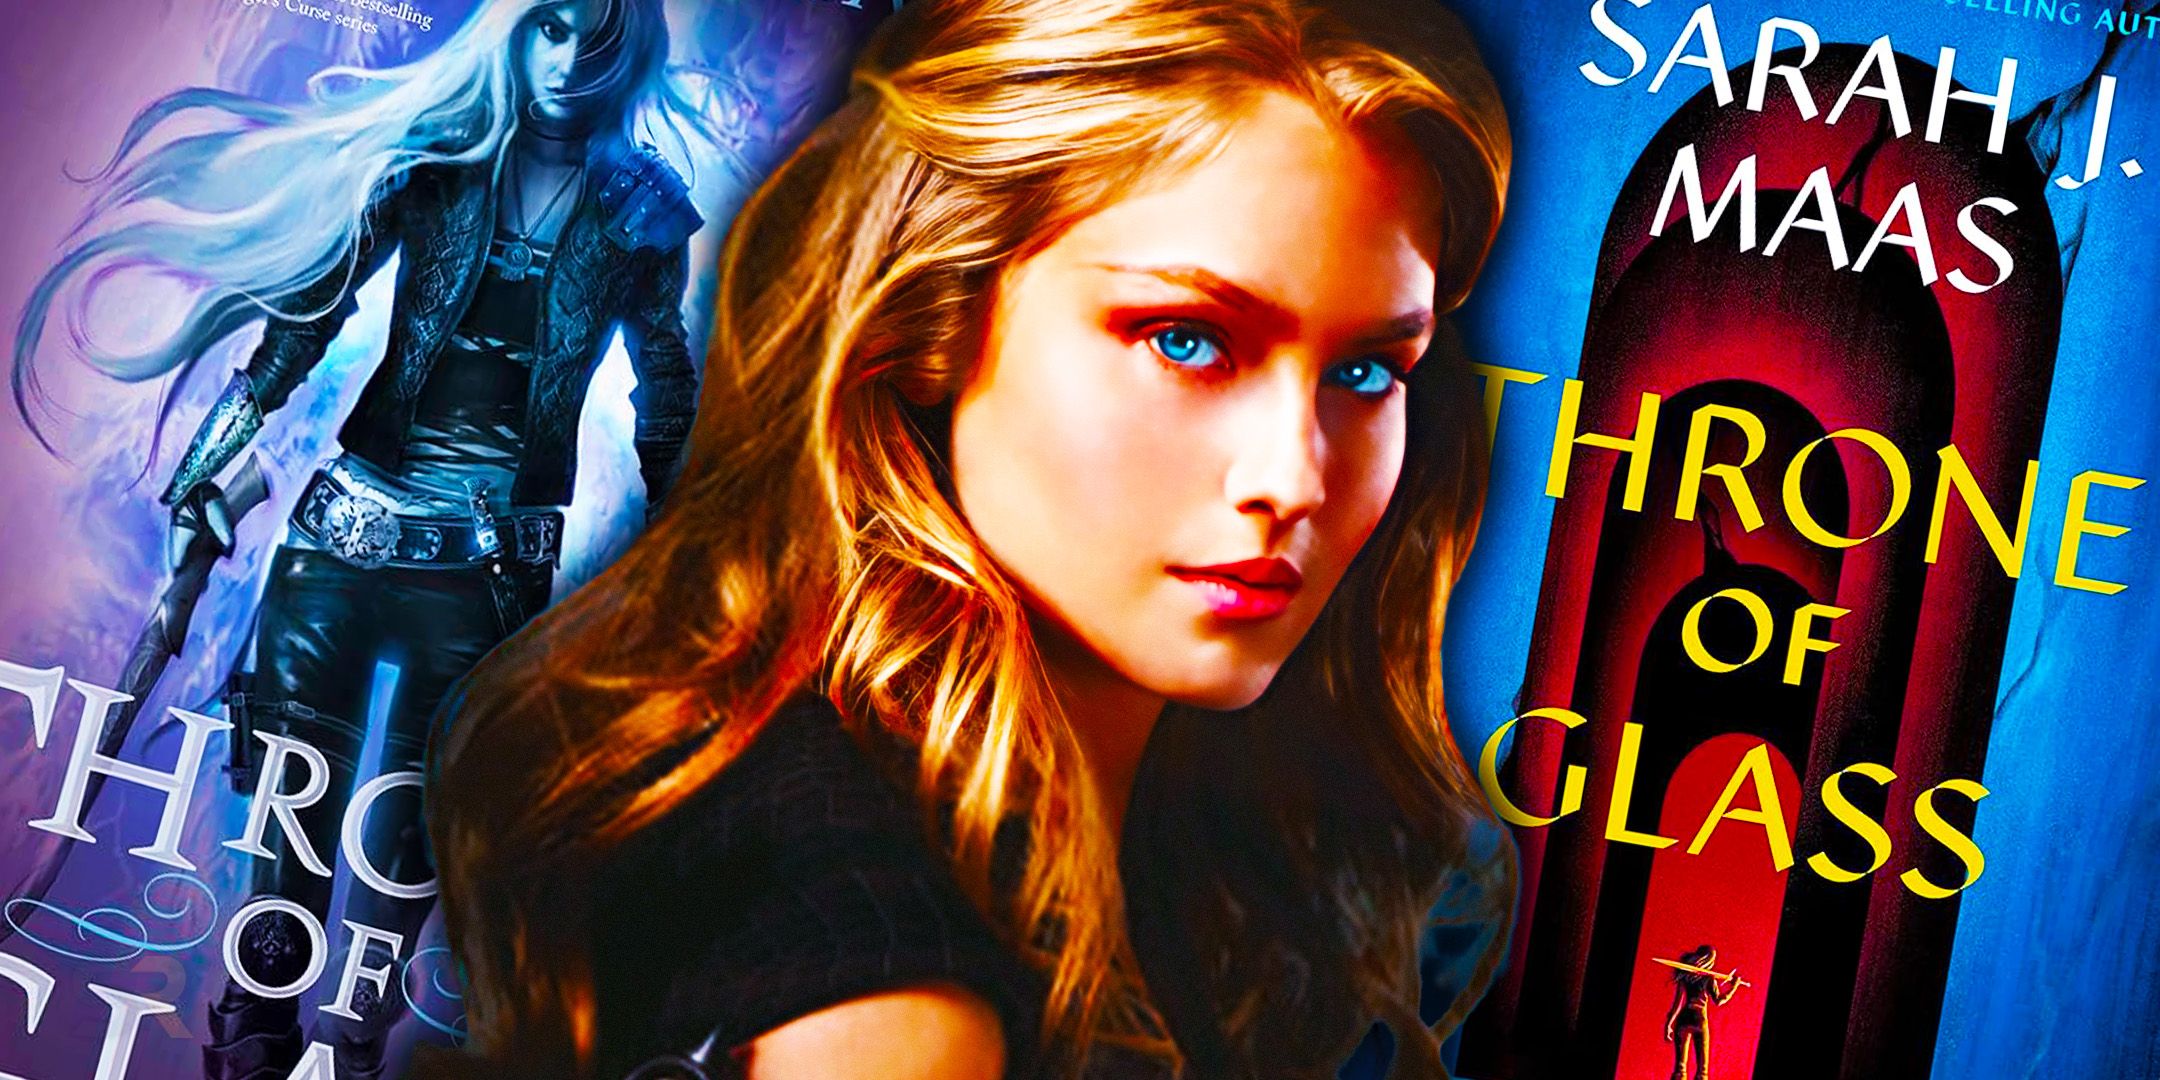 Three Throne of Glass covers featuring a full-body image of Celaena, a close-up image, and Celaena in the palace